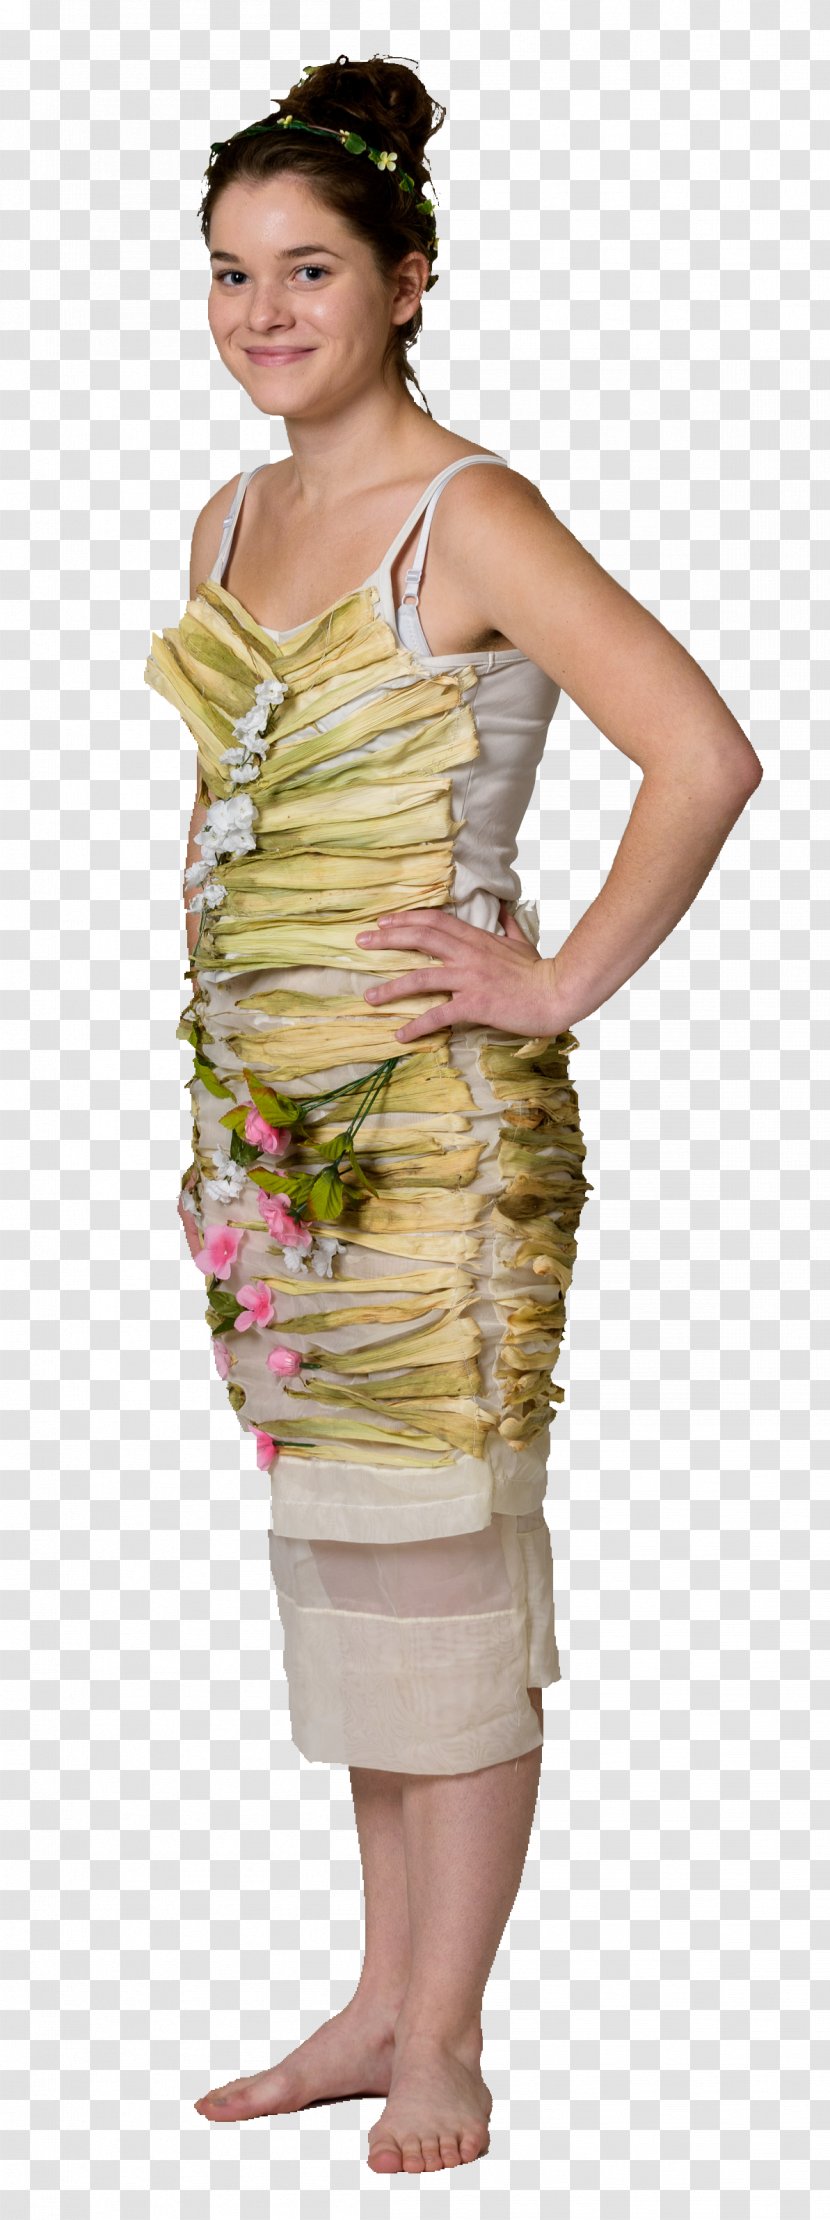 Flower Tucci Fashion Model Show - Runway Transparent PNG